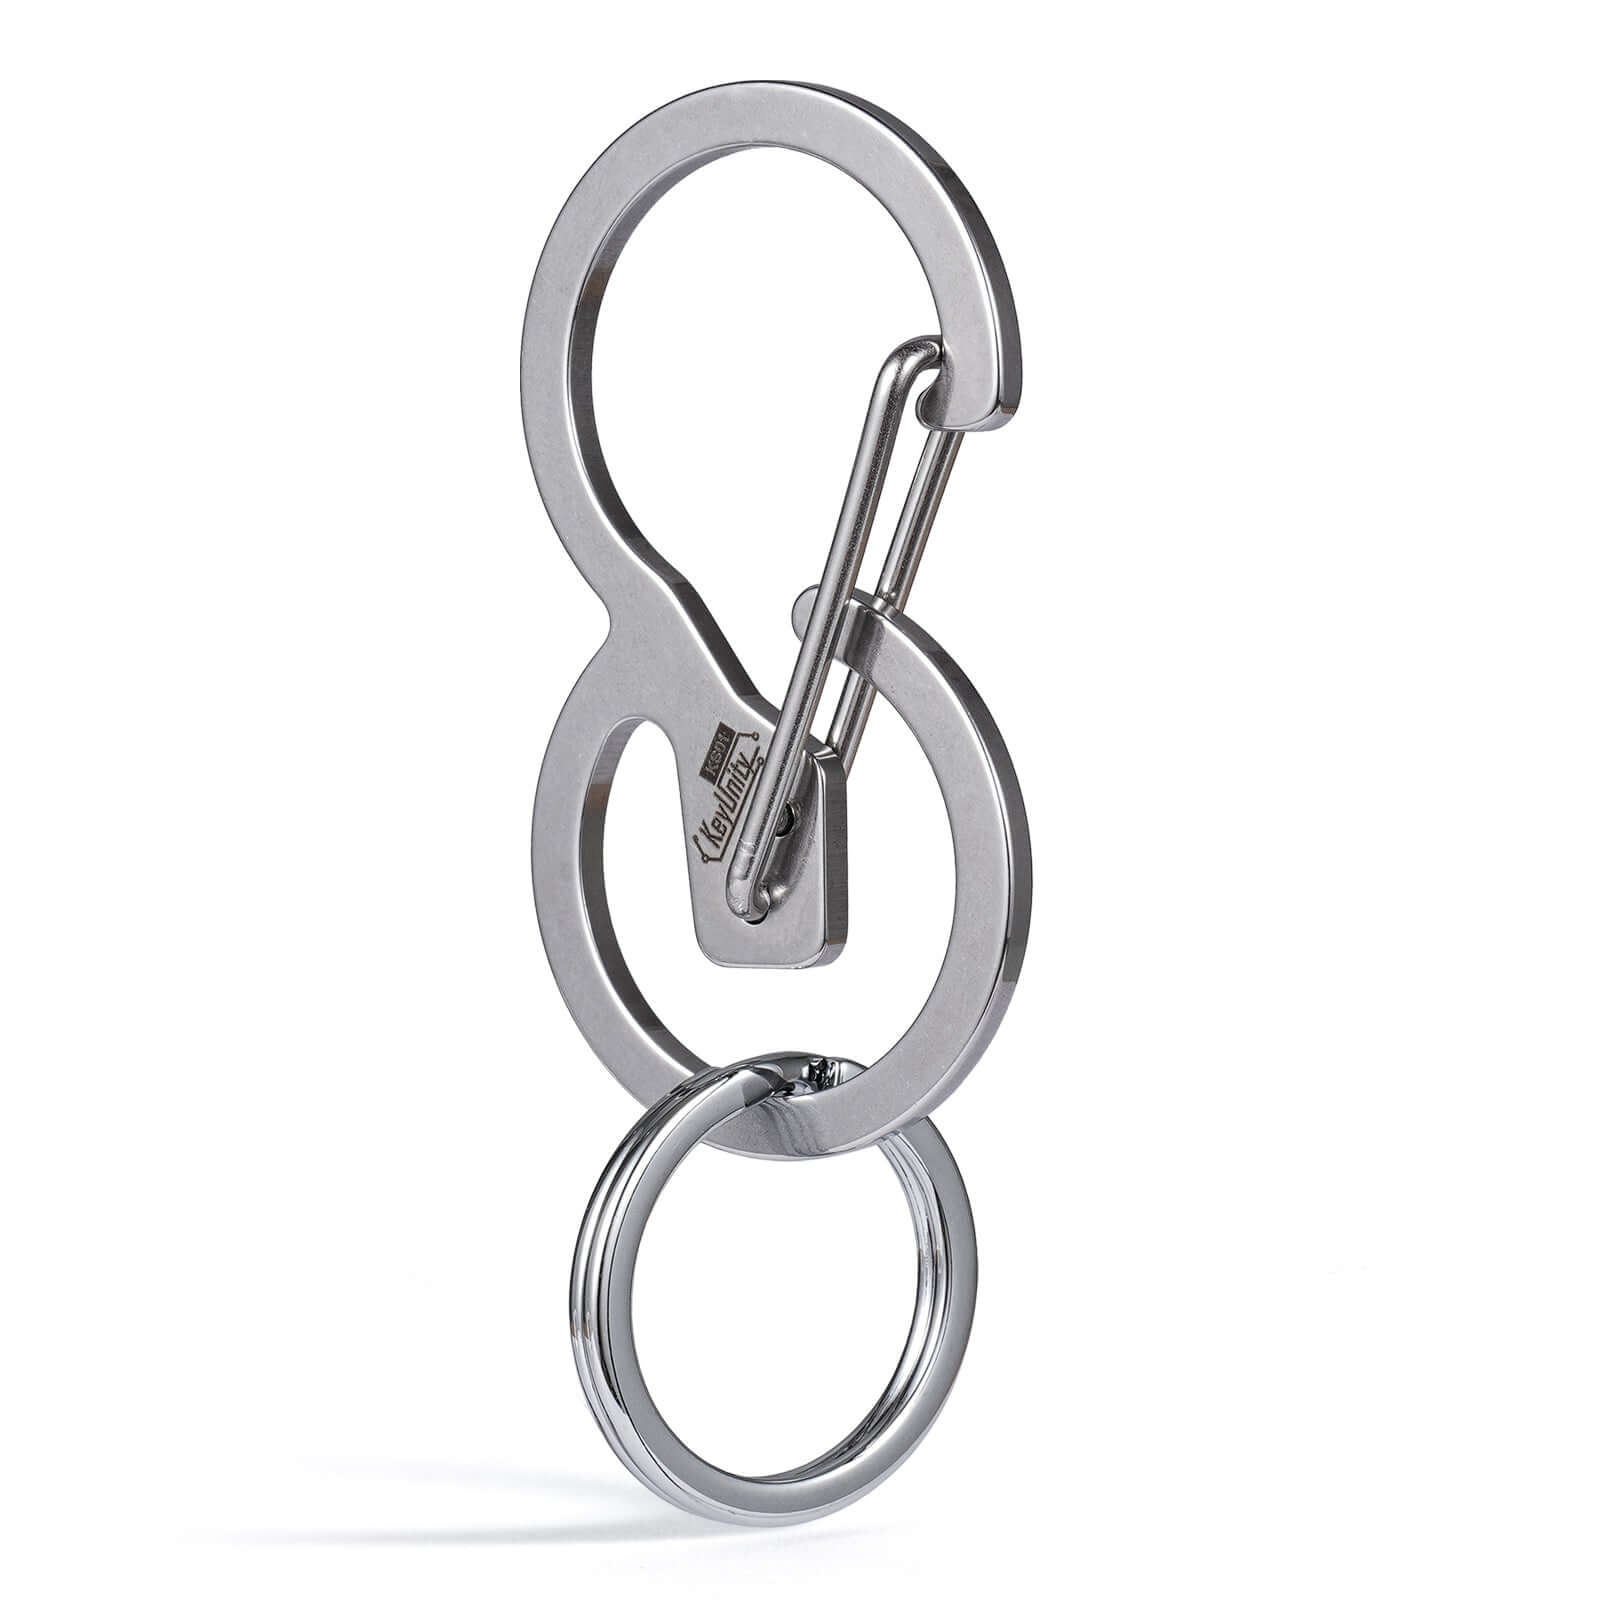 Mgaxyff Key Chain Clip, 1pcs Outdoor Alloy Quick Release Carabiner Key  Buckle Clip Keyring Climbing Accessory